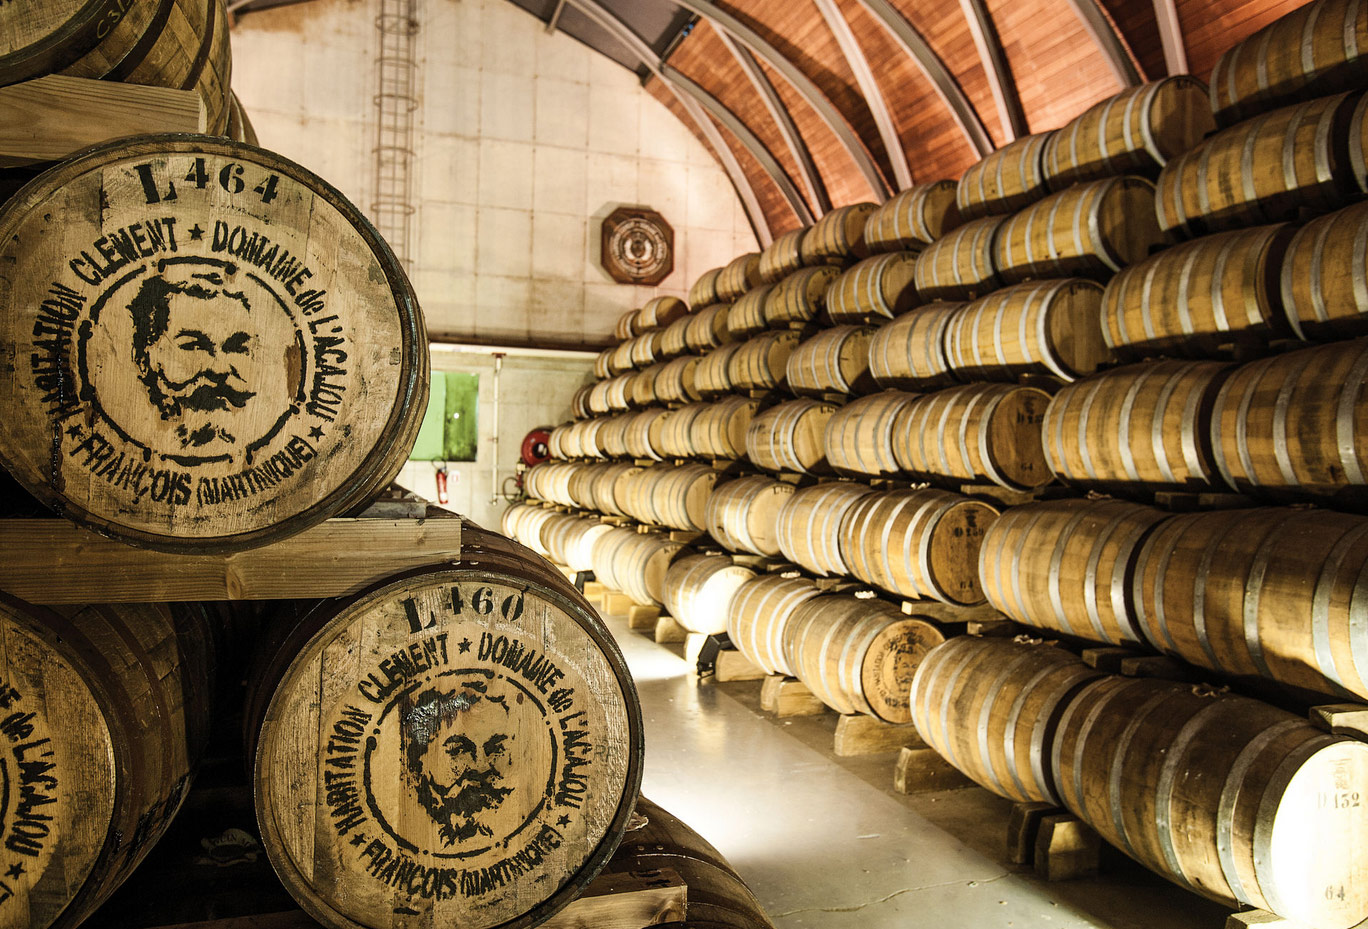 The barrel-aging process is key to rum production. The wood in the barrels lends the rum color and flavor, and it helps make each batch unique.